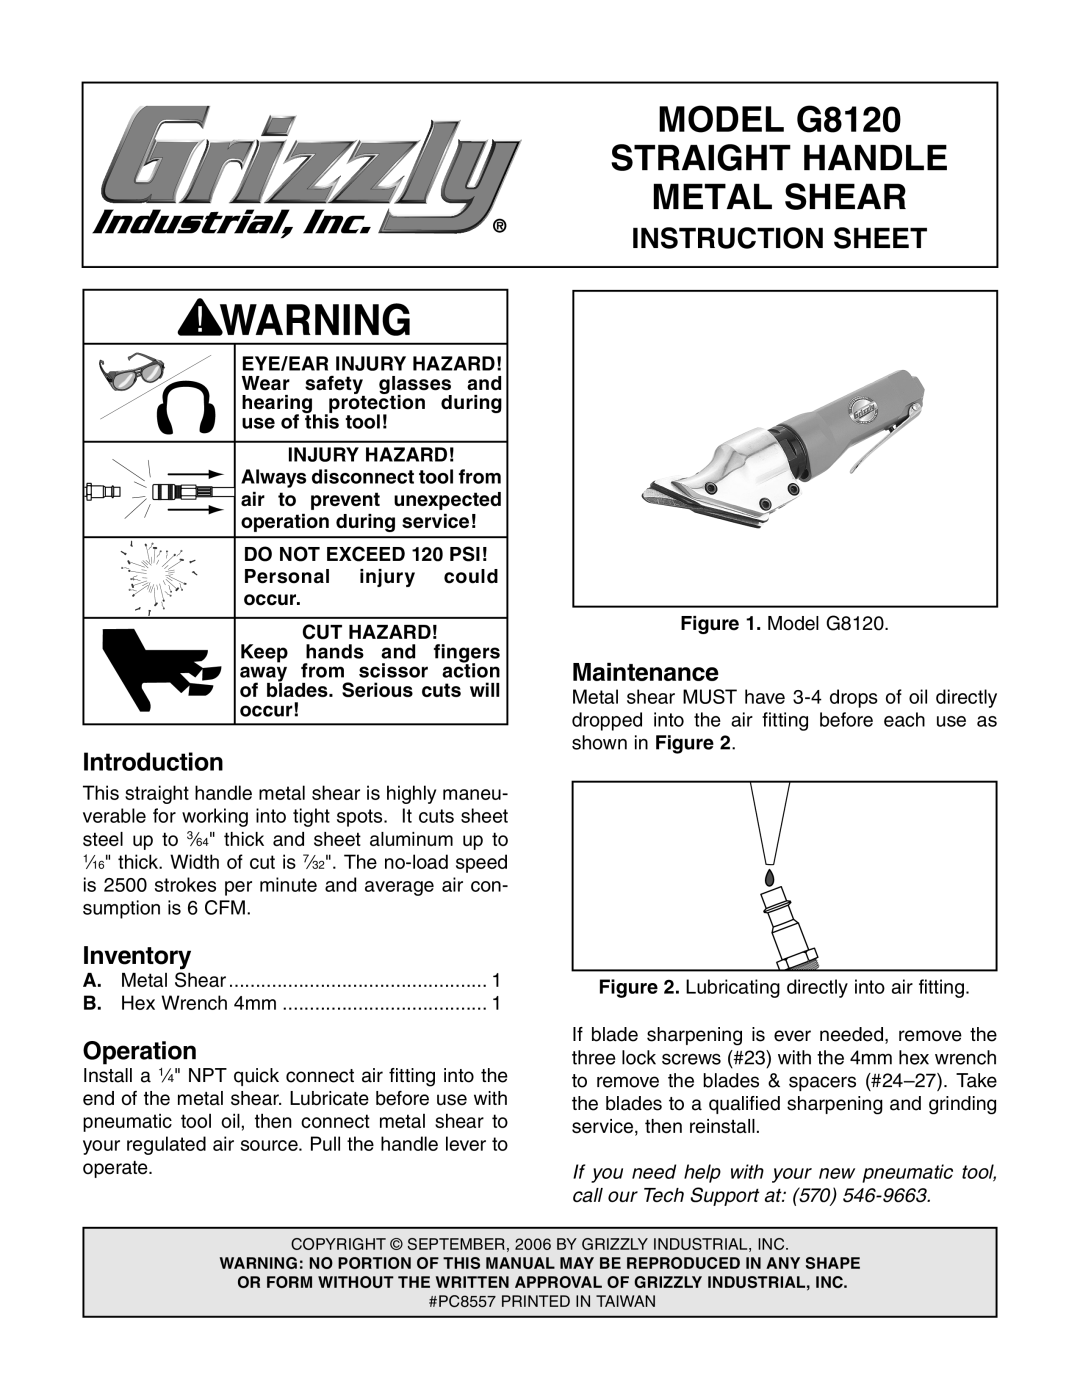 Grizzly instruction sheet MODEL G8120, Straight Handle, Metal Shear, Instruction Sheet, Introduction, Inventory 